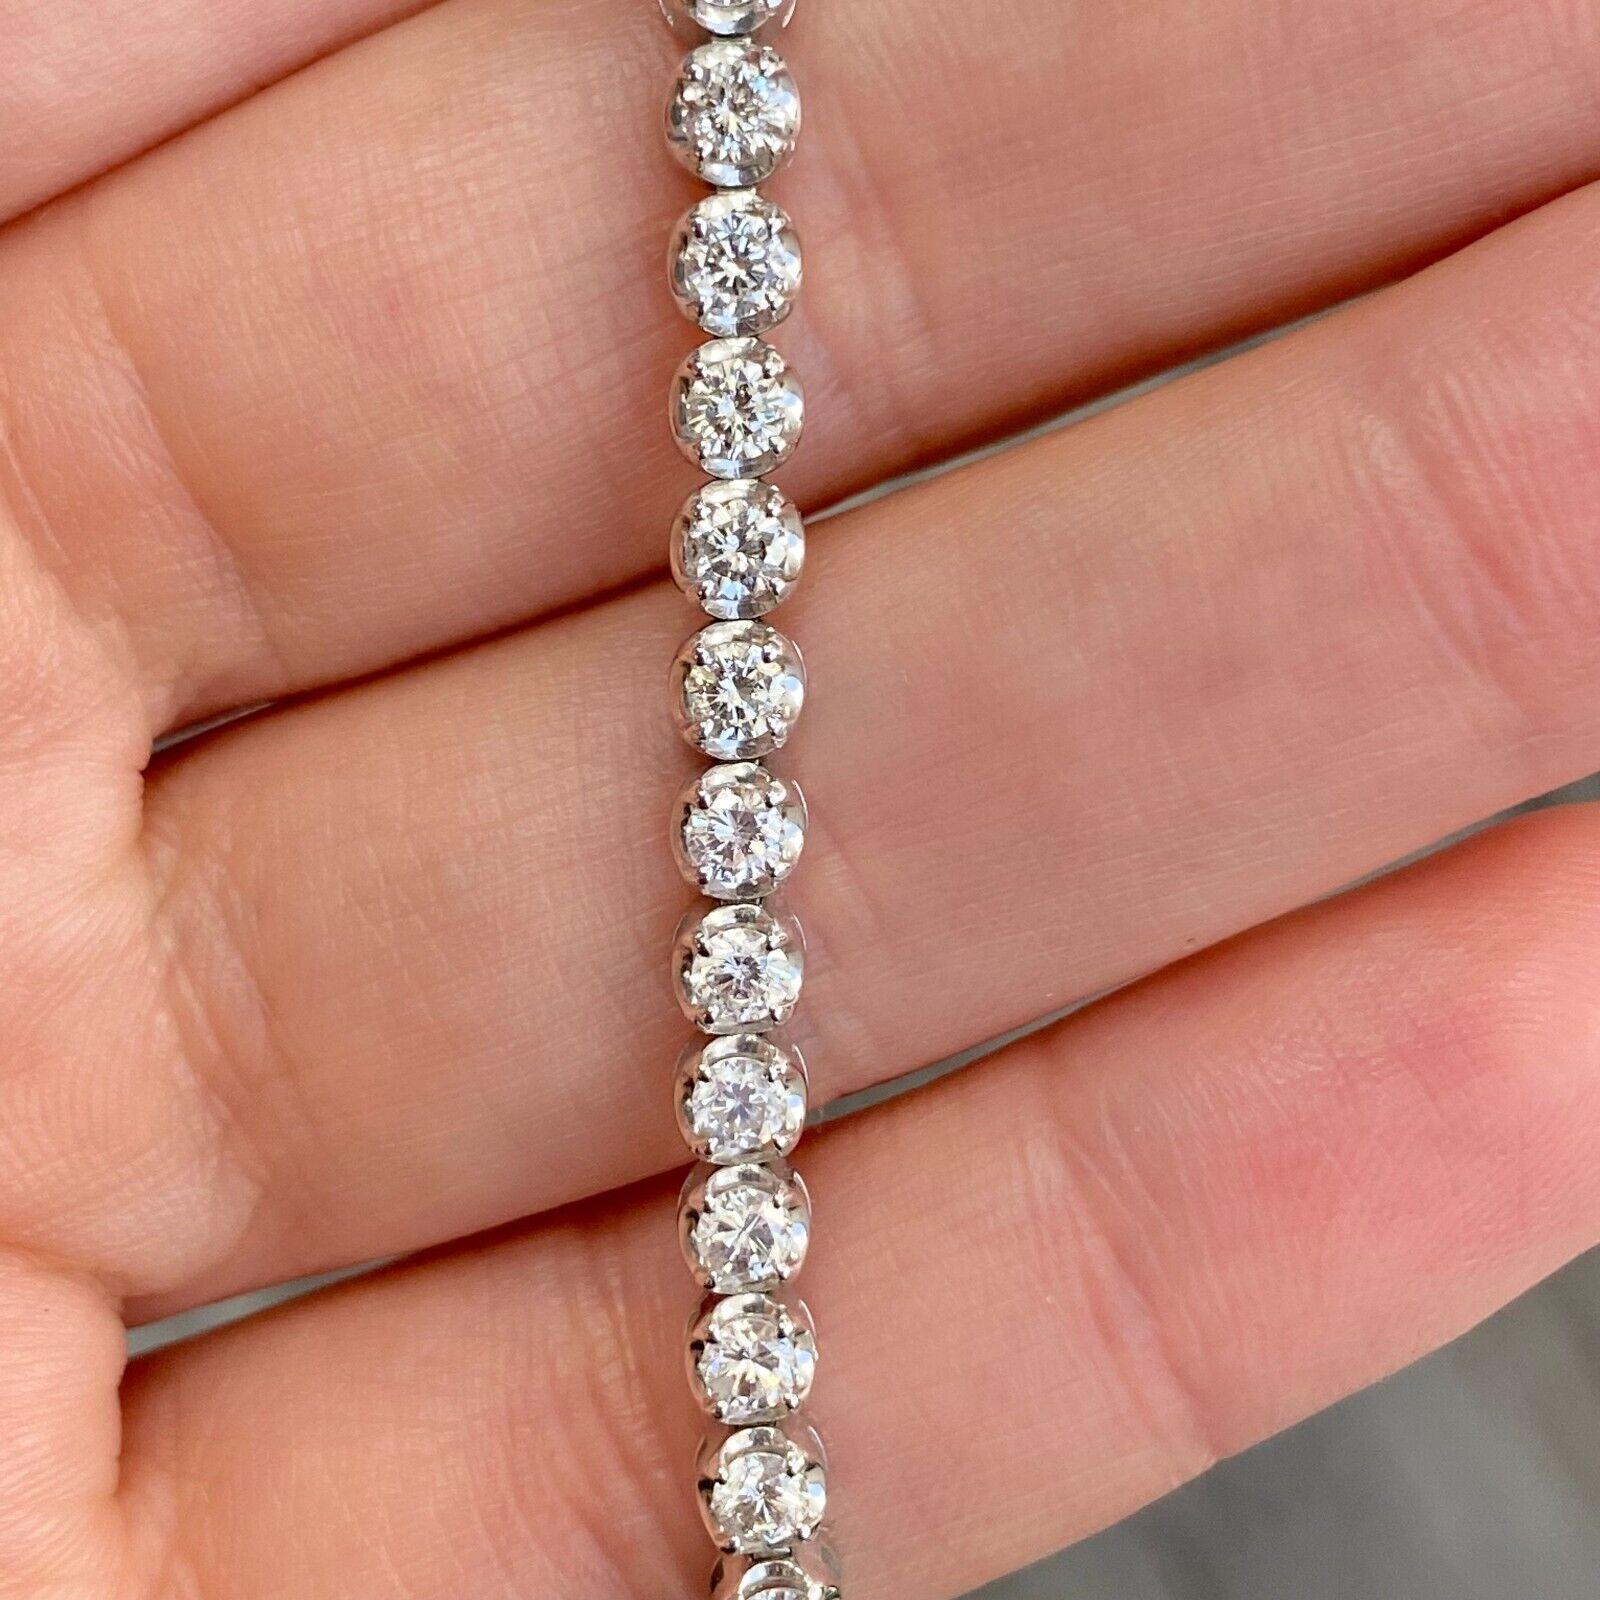 Specifications:
    main stone:ROUND DIAMONDS
    carat total weight: APPROXIMATELY 4.01CTW
    color:G
    clarity:si2
    metal:14K gold
    type:BRACELET
    weight:8.7 gr
    LENGTH:7 INCH

